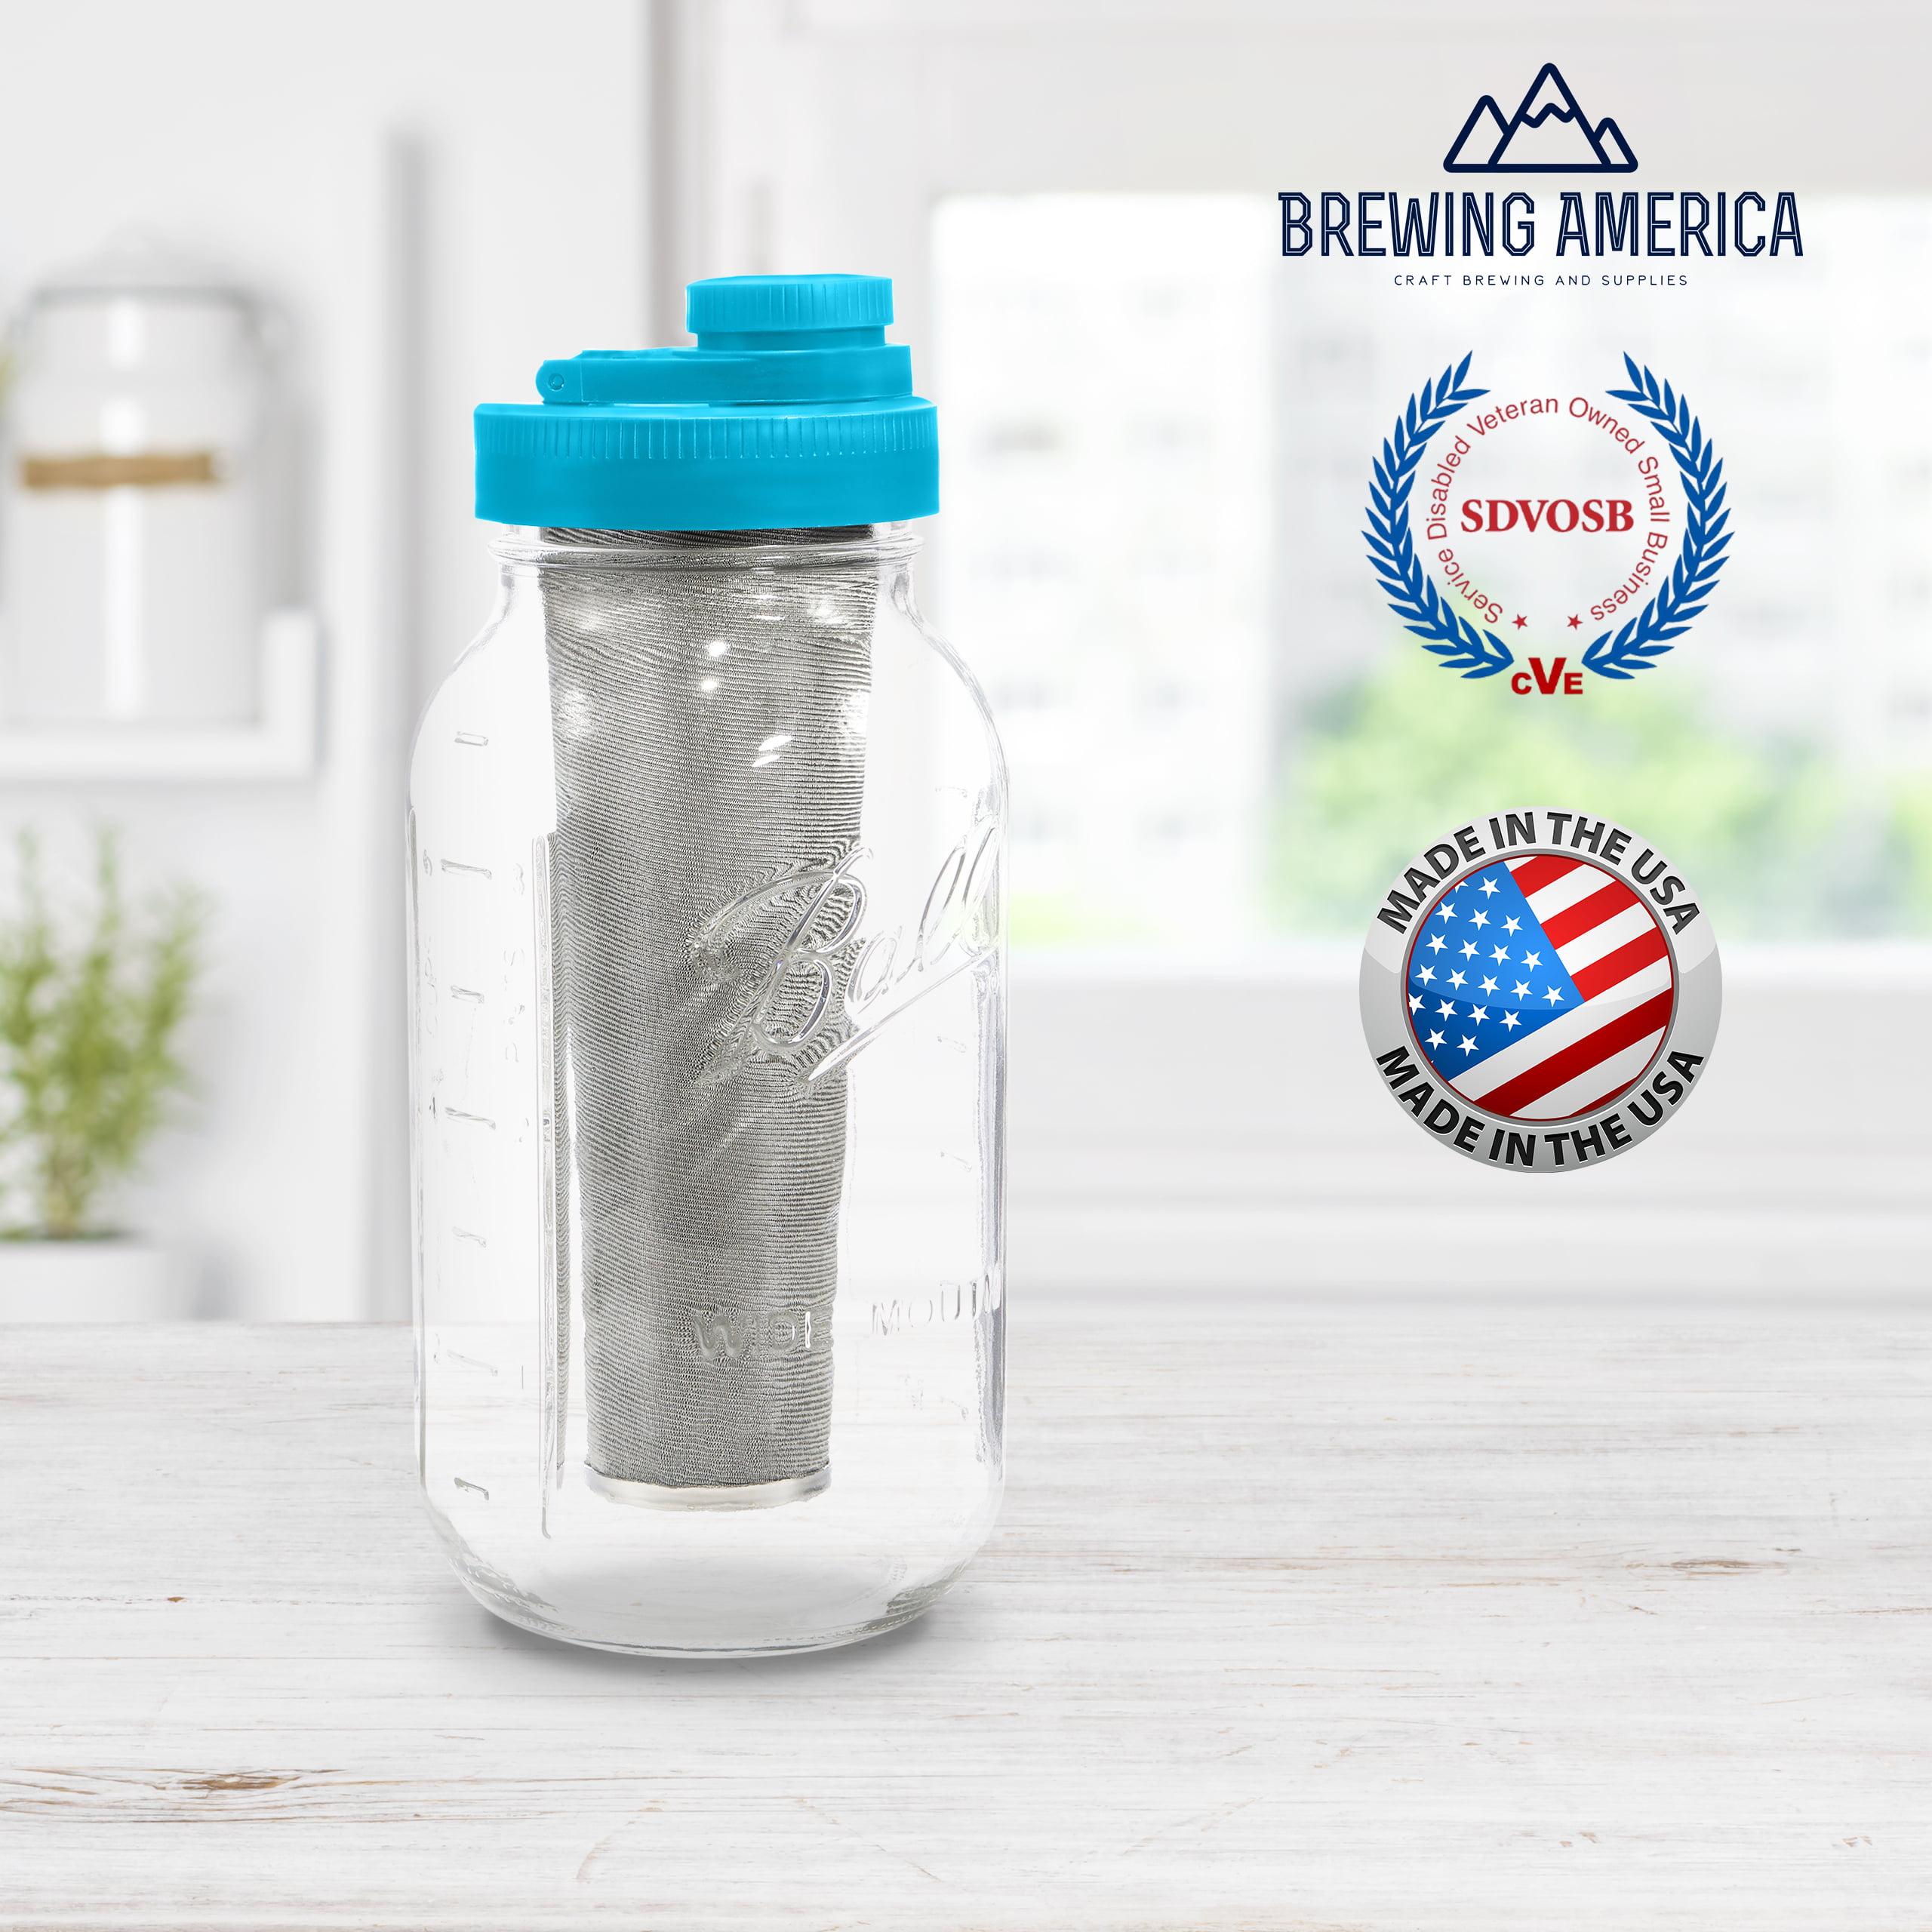 Cold Brew Coffee Maker & Tea Infuser Kit - 2 Quart Glass Ball Mason Jar, Recap Pour Spout, and Stainless Steel Filter